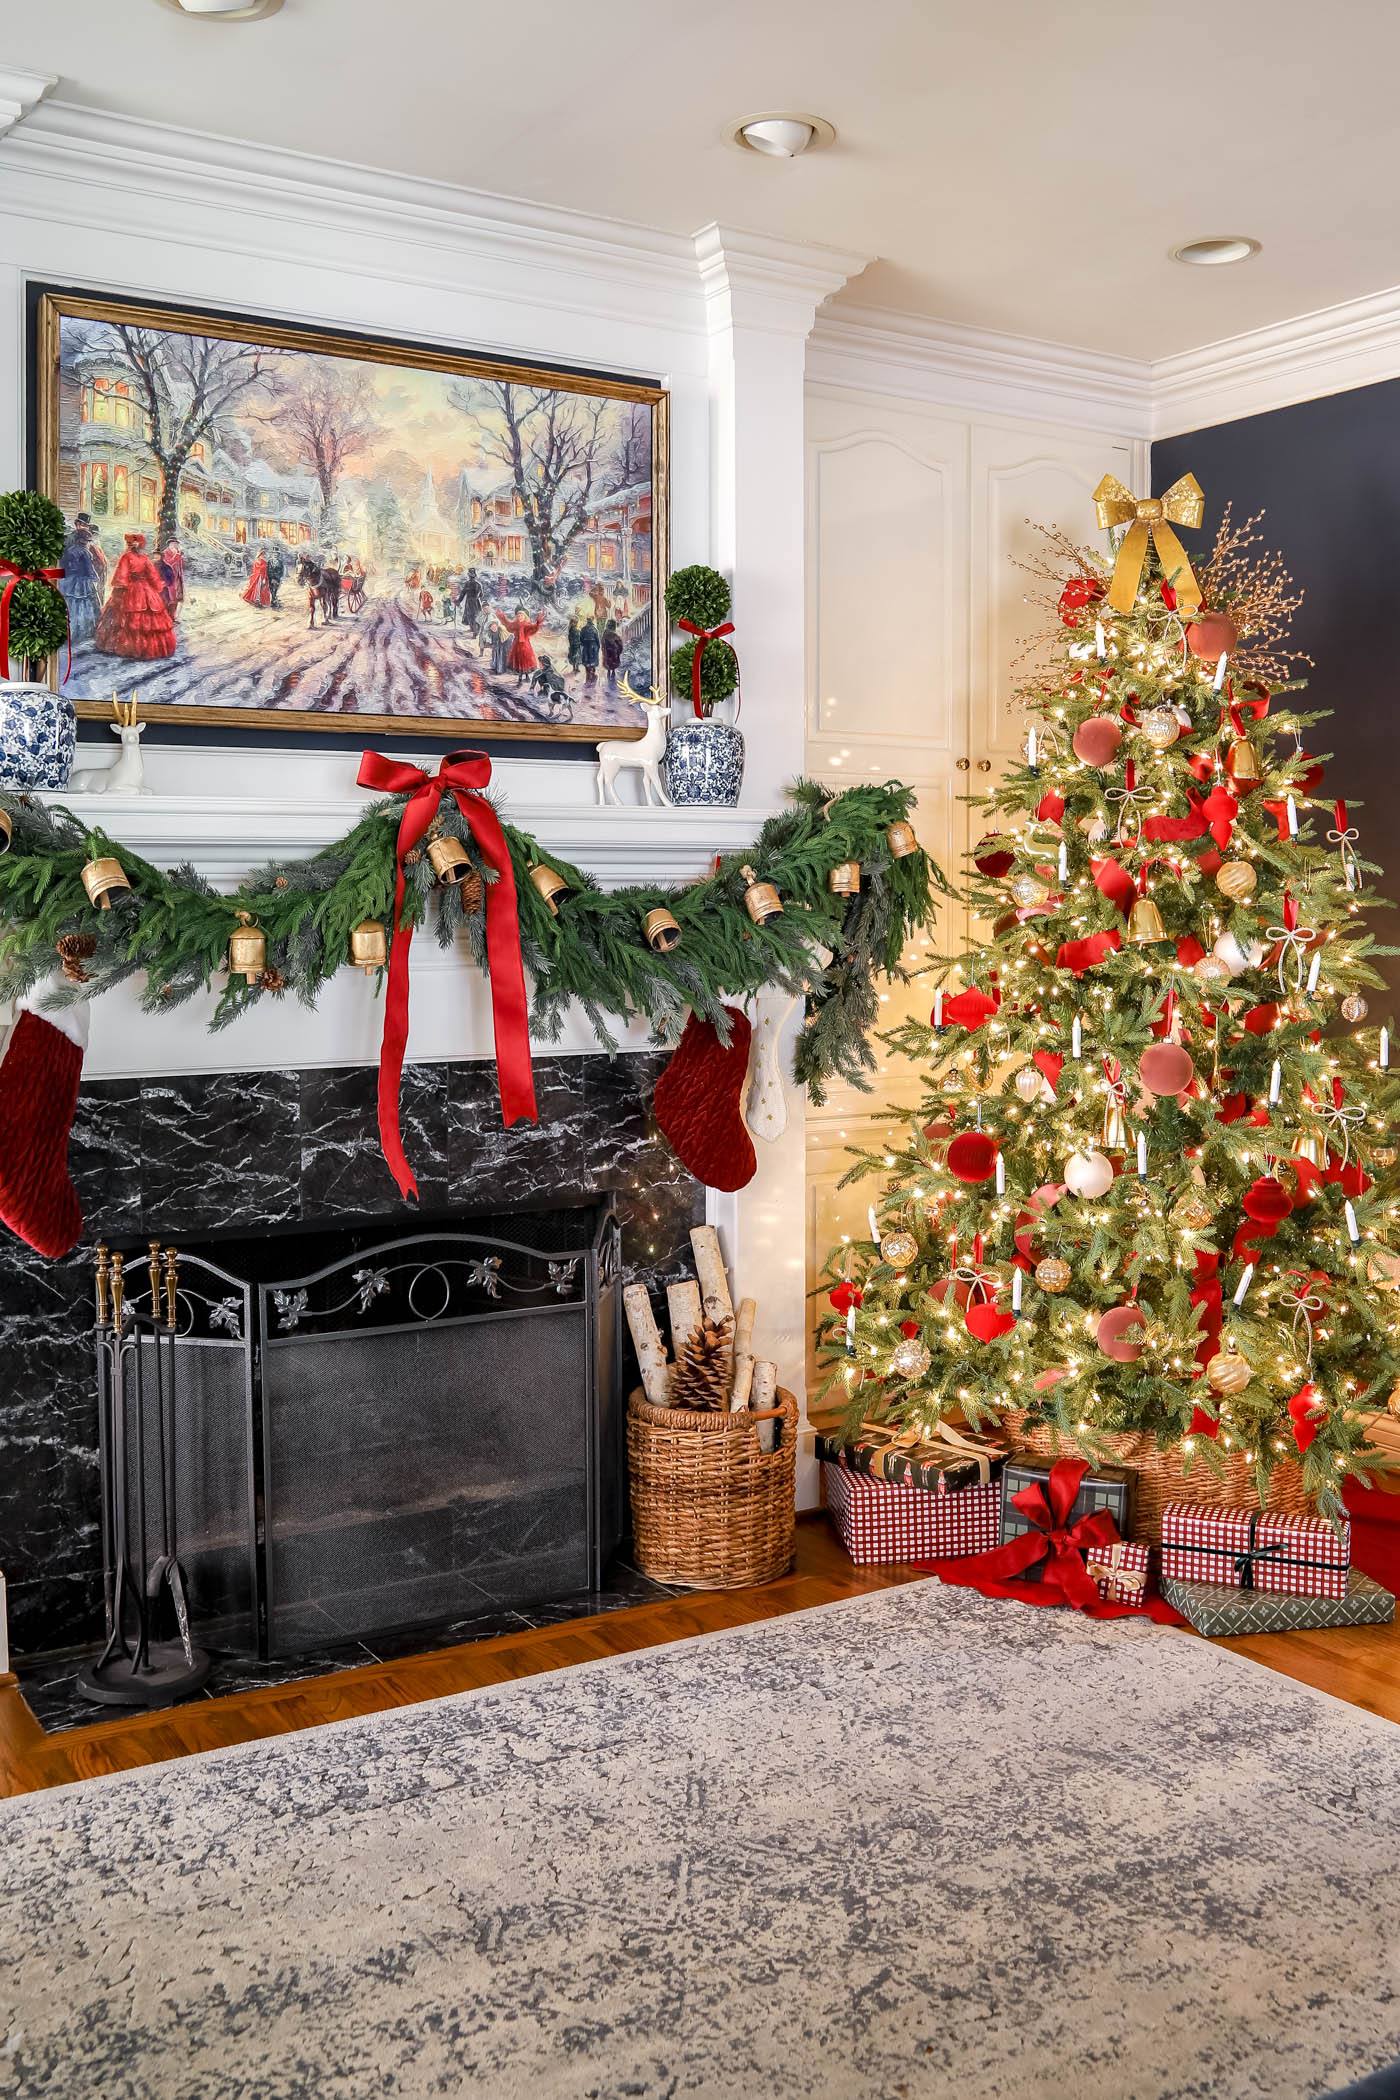 wrapped gifts under tree in red christmas decor room